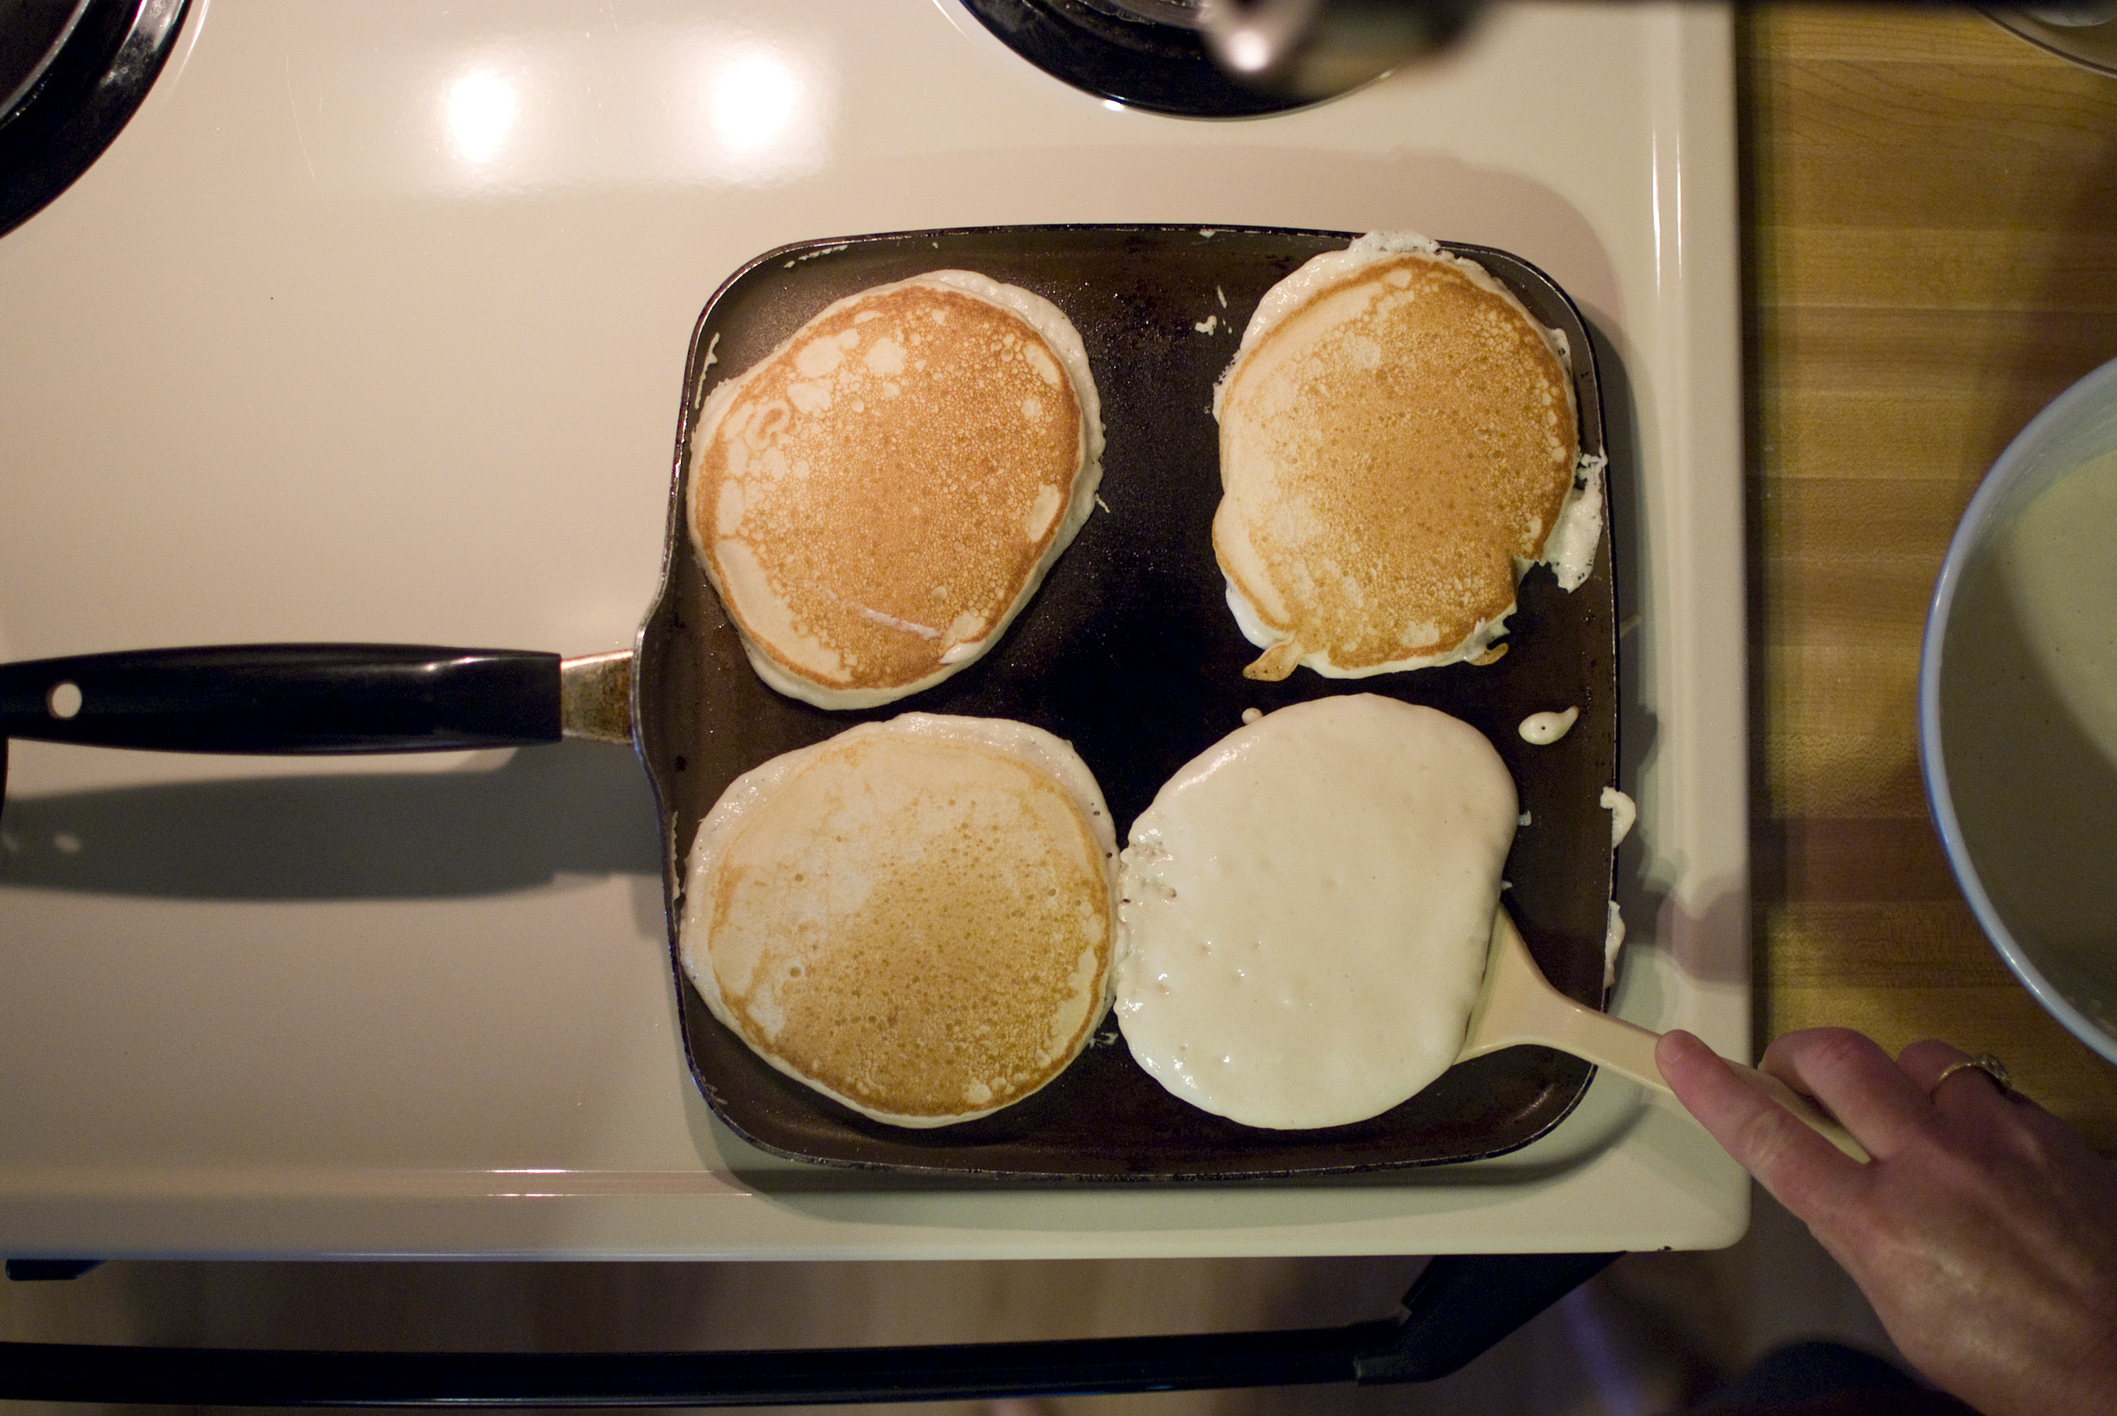 Cooking pancakes in a skillet